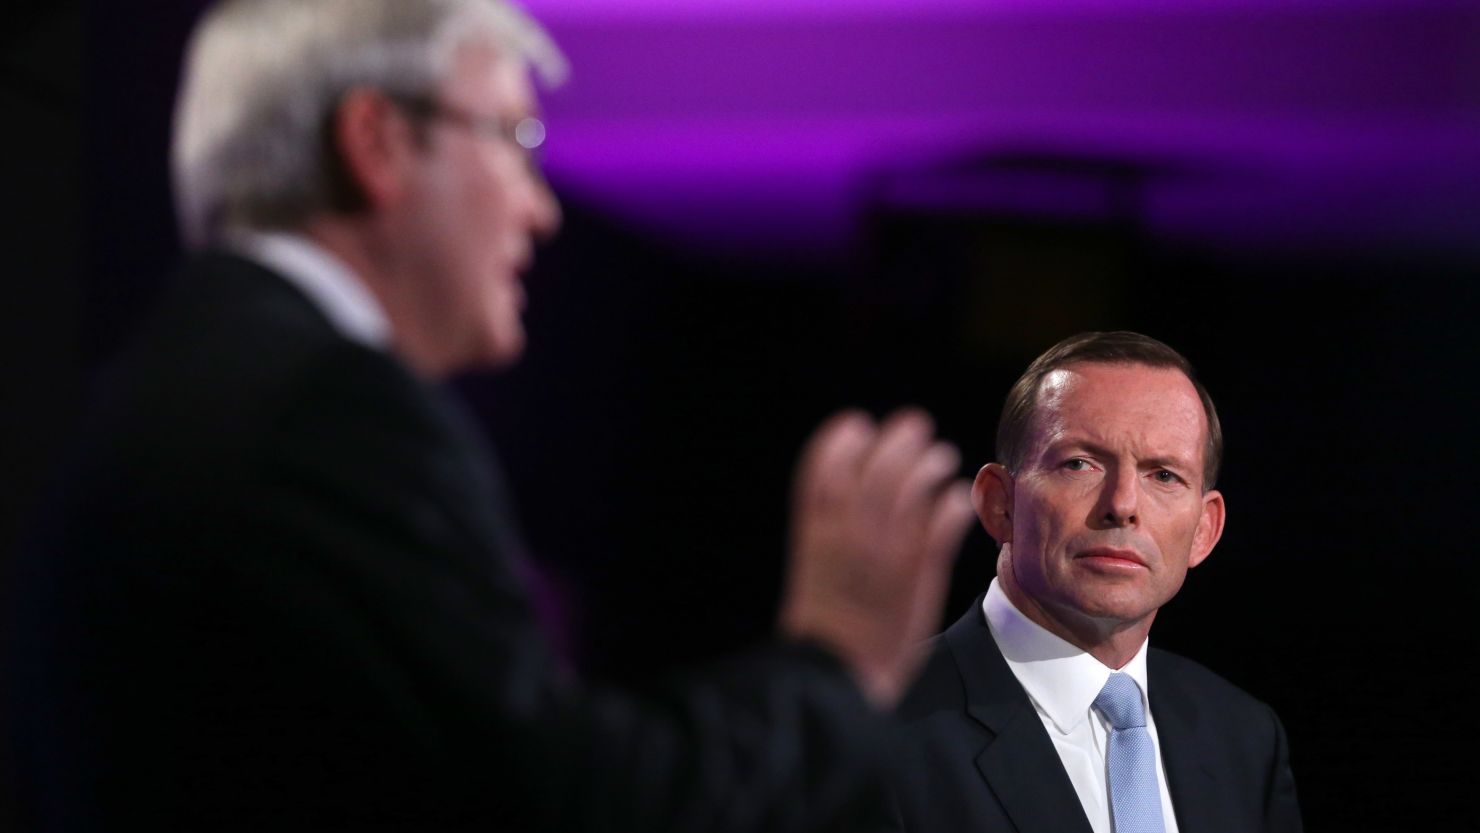 Prime Minister Kevin Rudd and Opposition Leader Tony Abbott during the Leaders Debate on August 11, 2013 in Canberra.